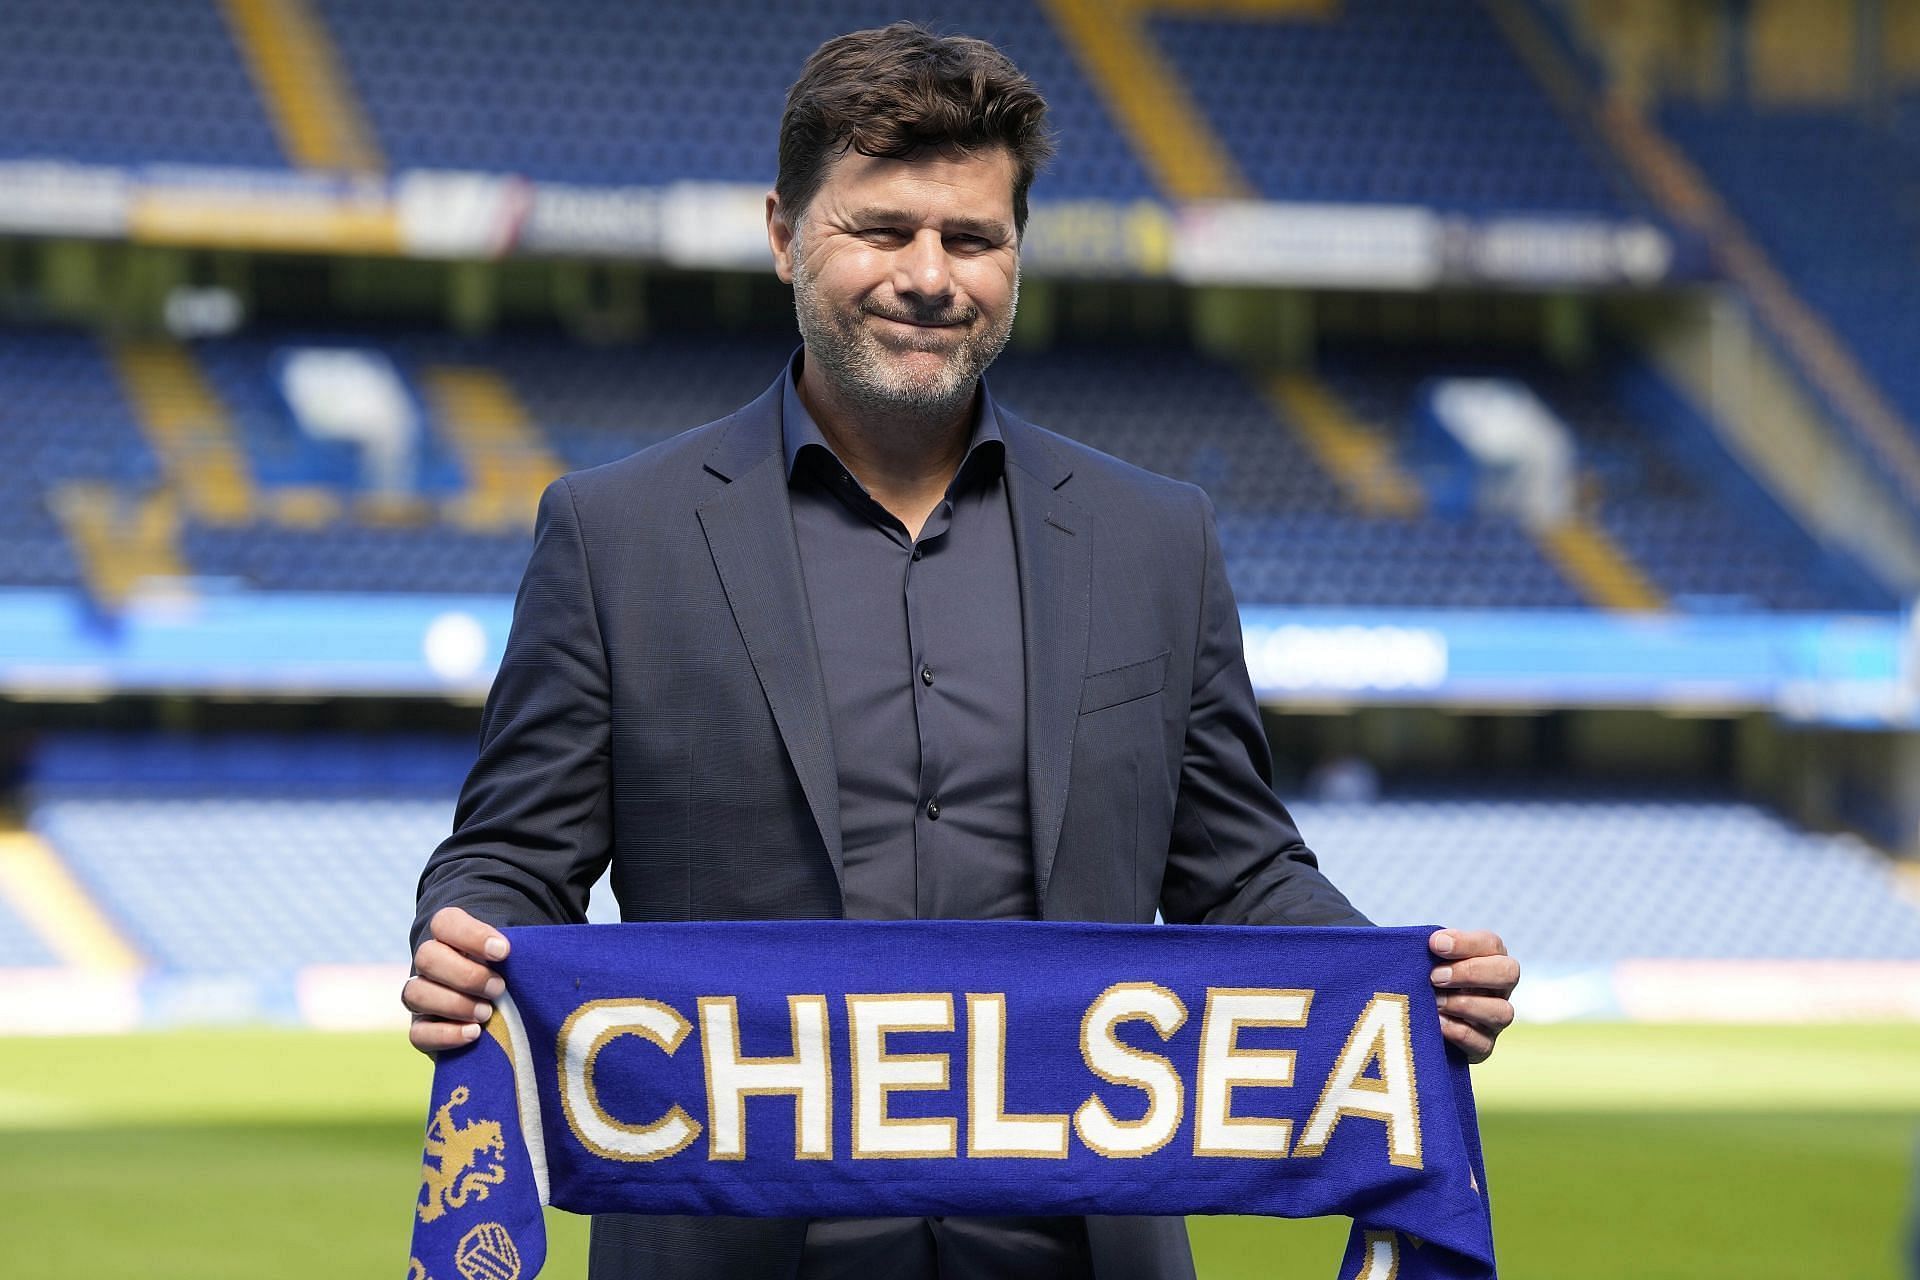 Chelsea hired manager Mauricio Pochettino to steady the ship this season.